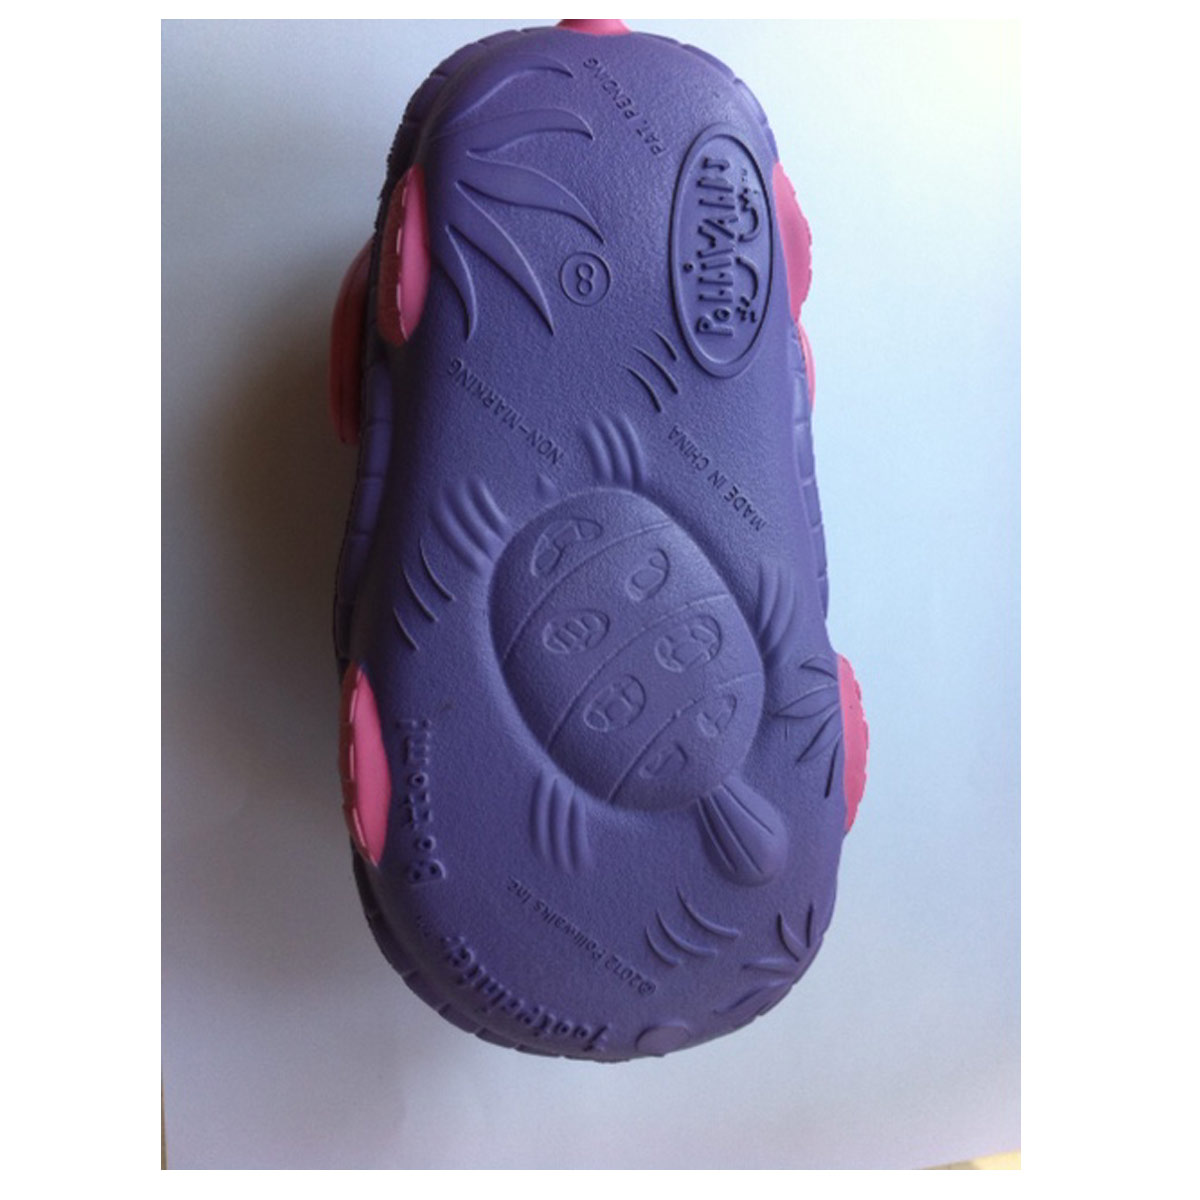 Polliwalks : Toddler shoes Tory  the Turtle  Purple # 12